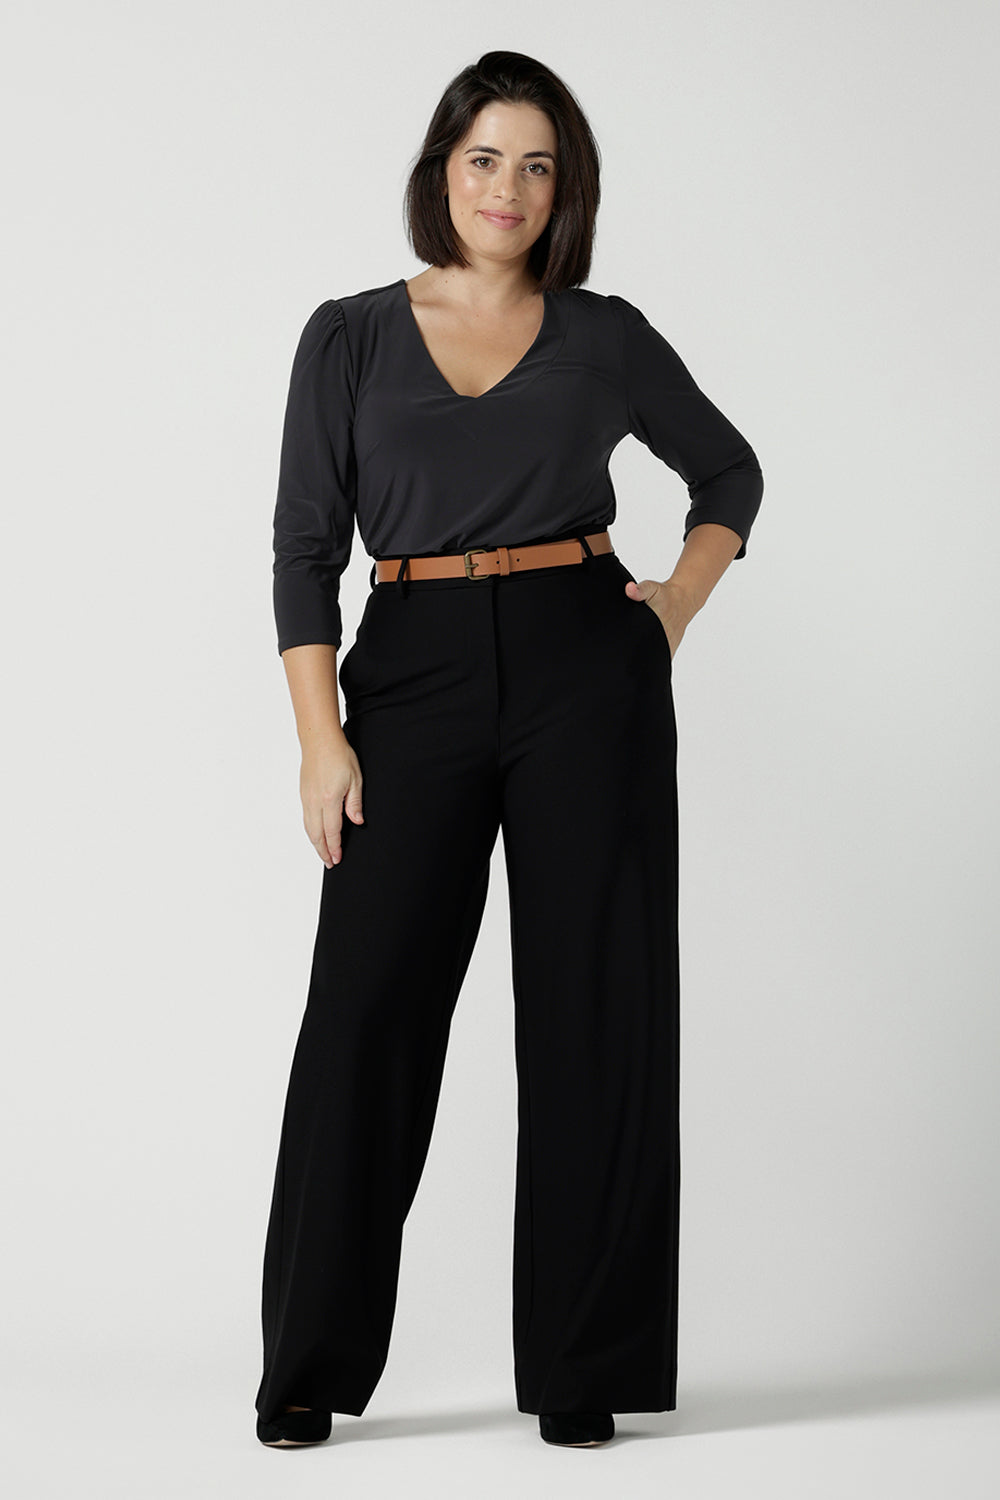 A size 10 woman wears the Vida top in Charcoal, a grey work top for women with a V-neckline. Comfortable corporate workwear for women. Made in Australia for women. Size 8 - 24.